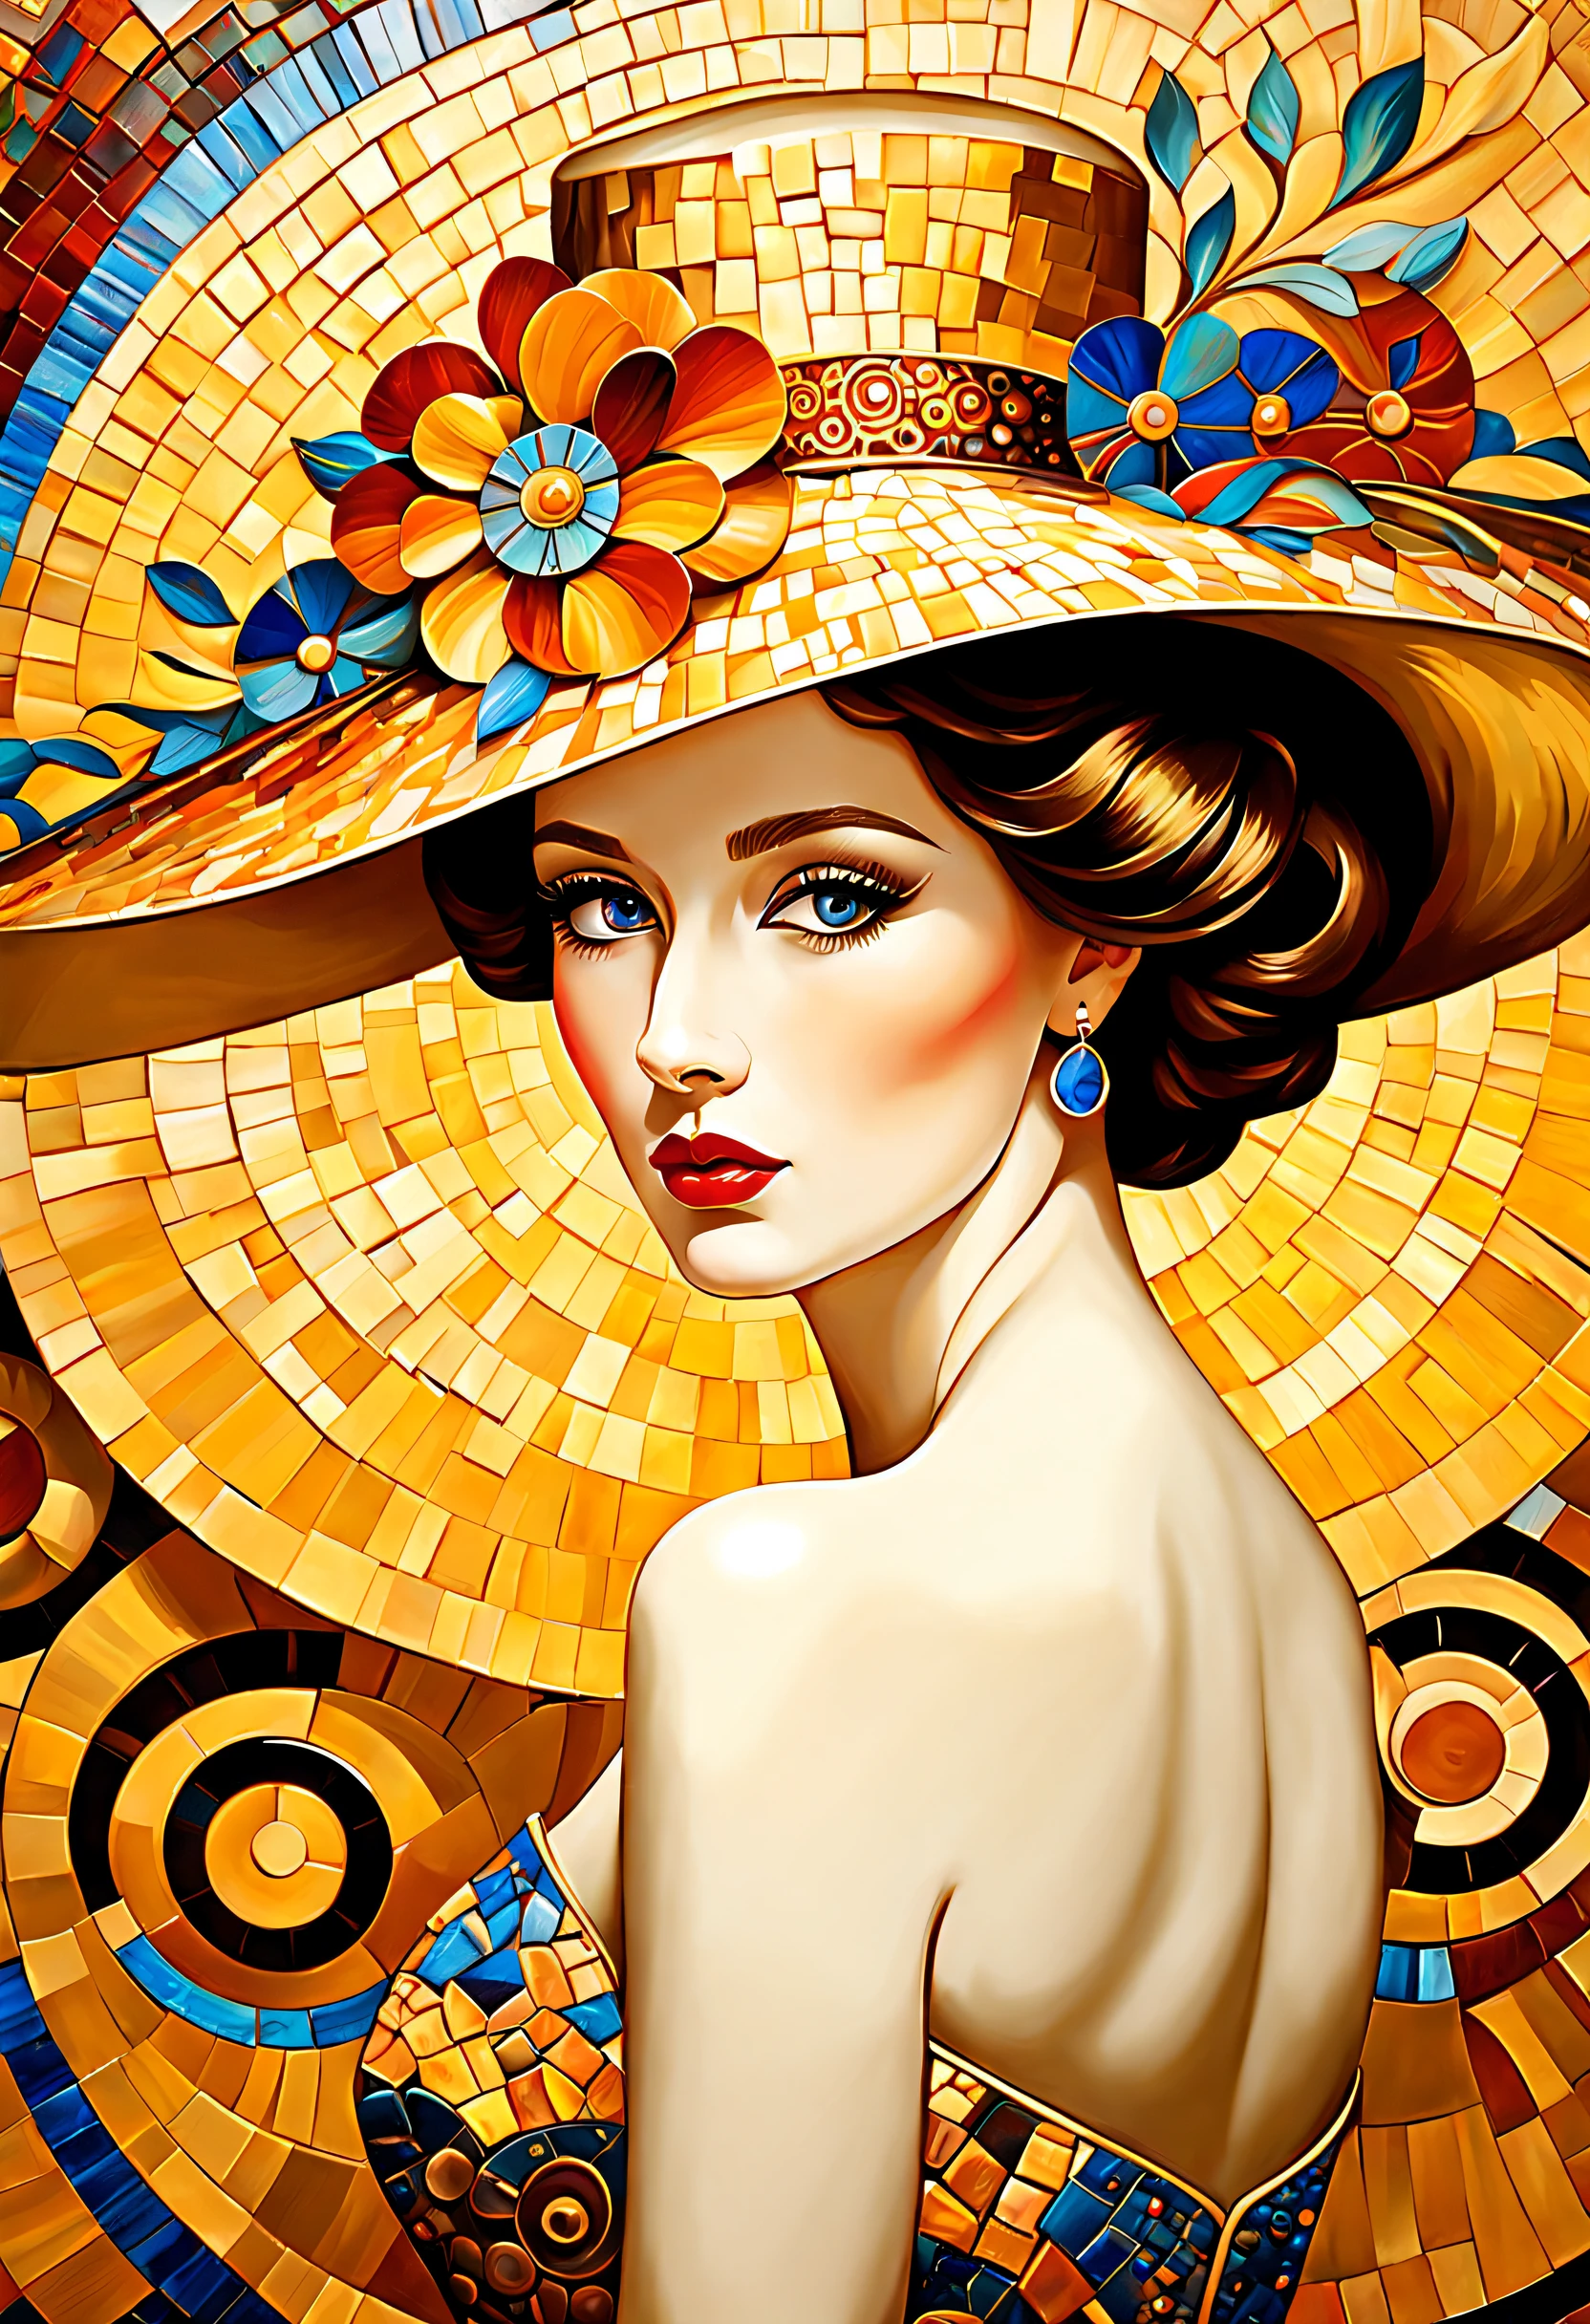 Fine Art, Oil painting, thick brushstokes, an elegant lady lost in her dreams, inspired by [Gustav Klimt | Vincent van Gogh | Pablo Picasso | Gil Elvgren], hat, captivating mosaic wall, swirls, Triadic colors, Art Nouveau, Byzantine Mosaics, gold accents, Elegance, Sophistication, Classy, highly refined, Stylish, complex background, Timeless, Luxury, Subtle, Graceful, High-end, intricate patterns, sensual forms, intricate textures, dramatic lighting, emotional depth, dehazed, perfect cohesive composition